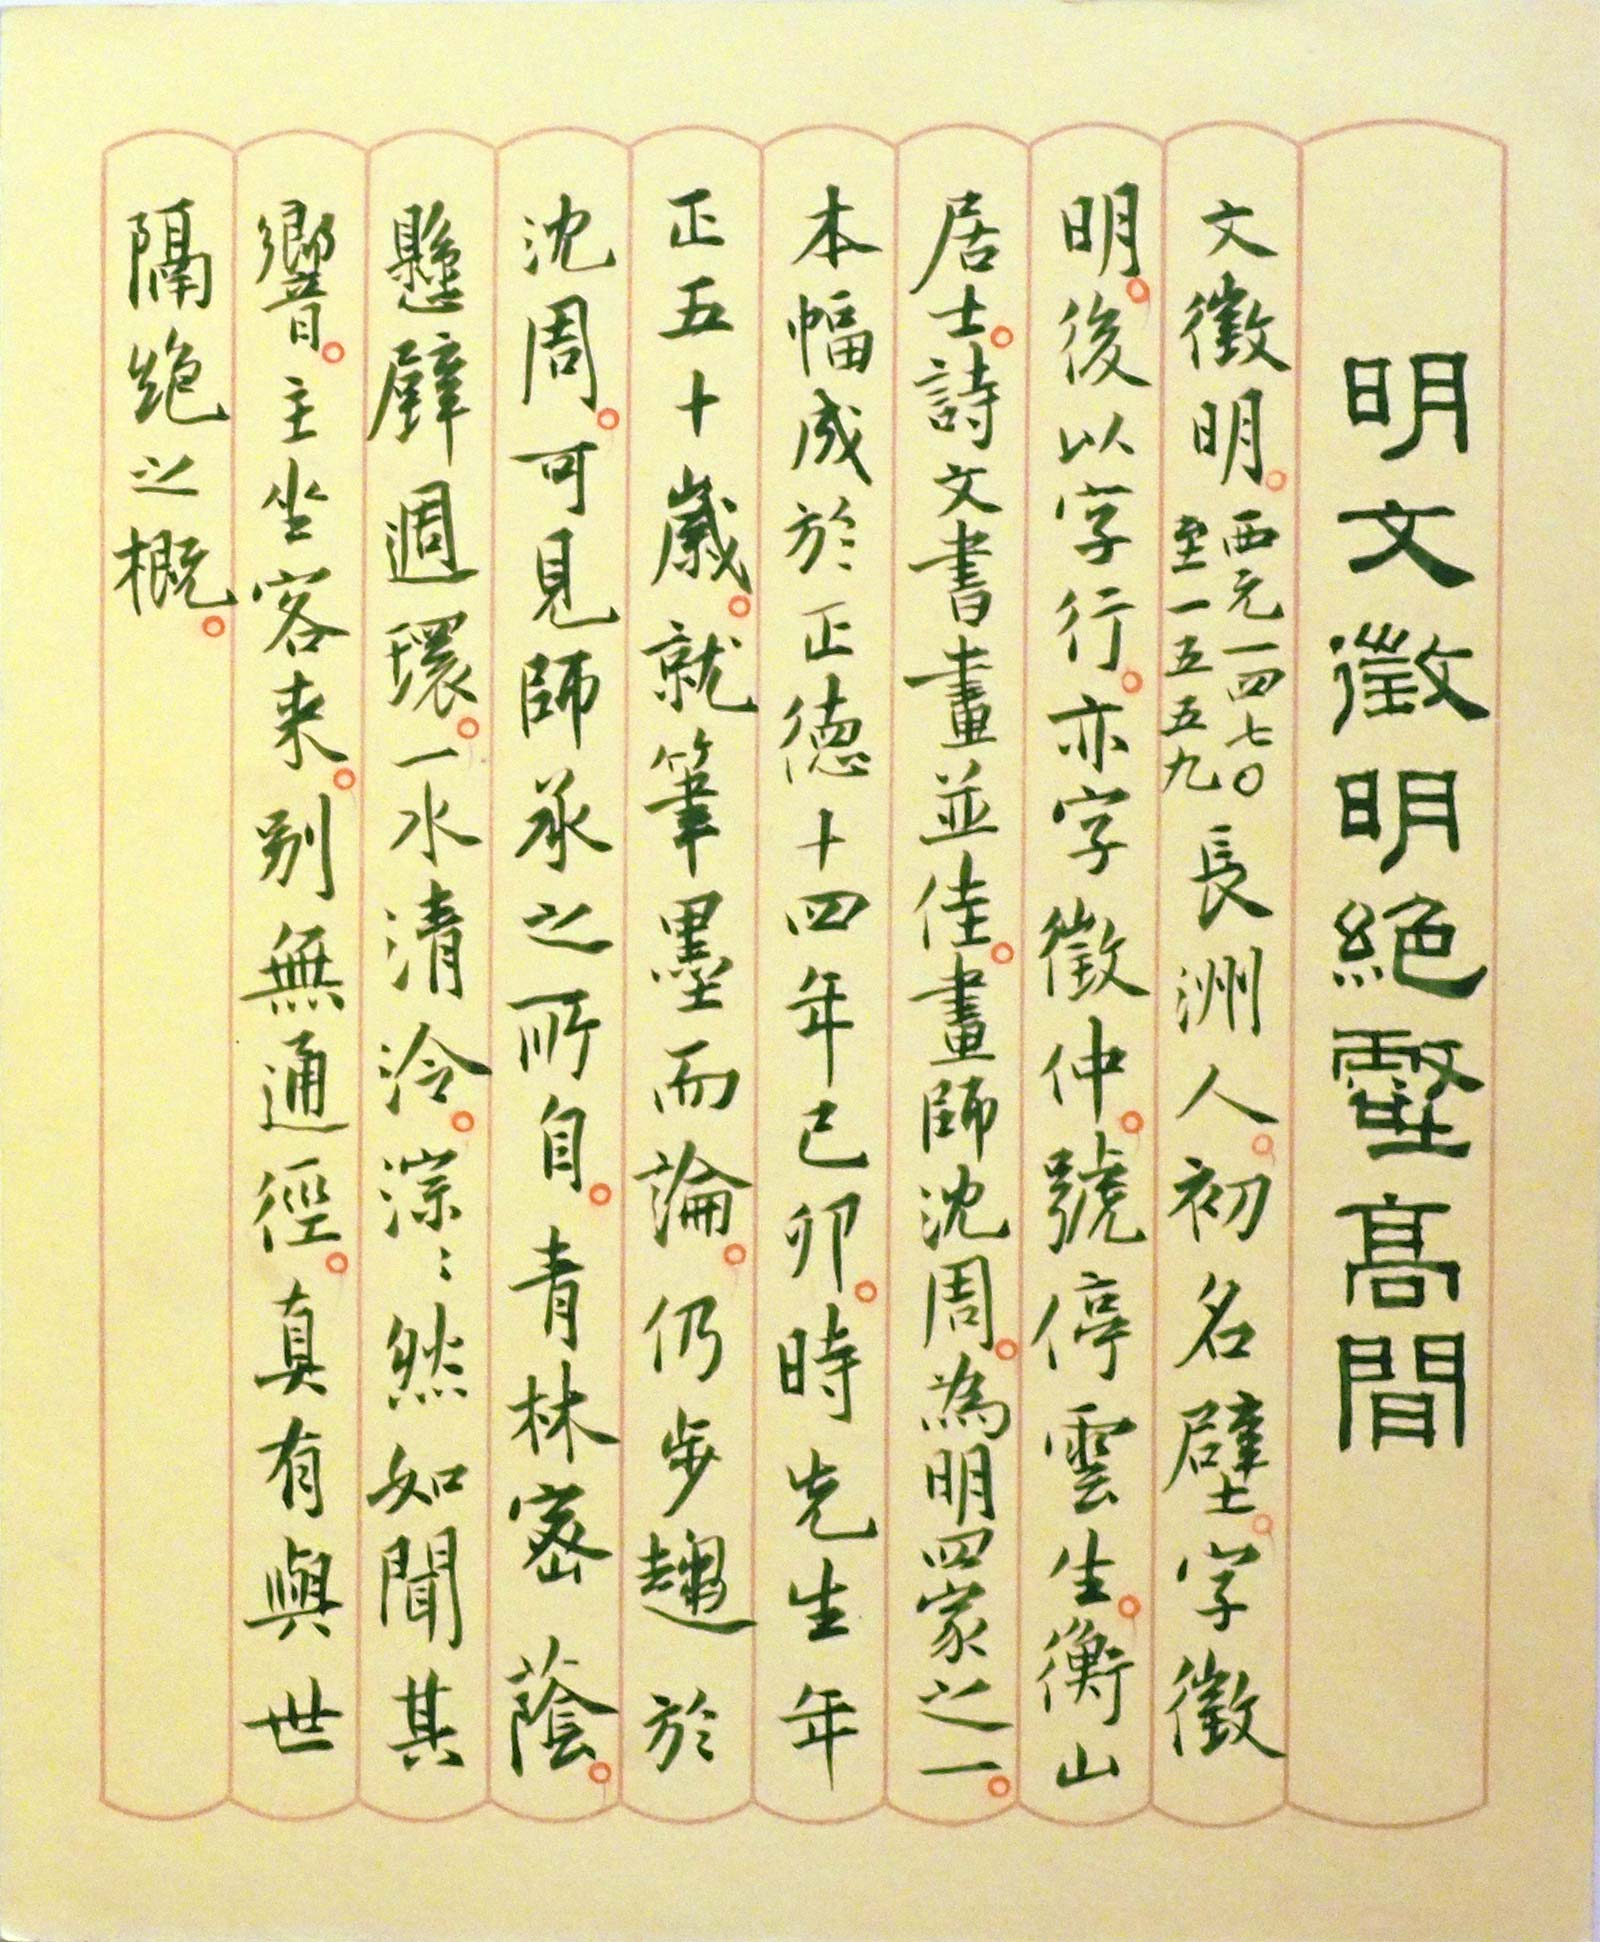 This explanatory label written in brush and ink by Chiang Chao-shen was perhaps done for the "Ninety Years of Wu School Painting" special exhibition held in 1981.